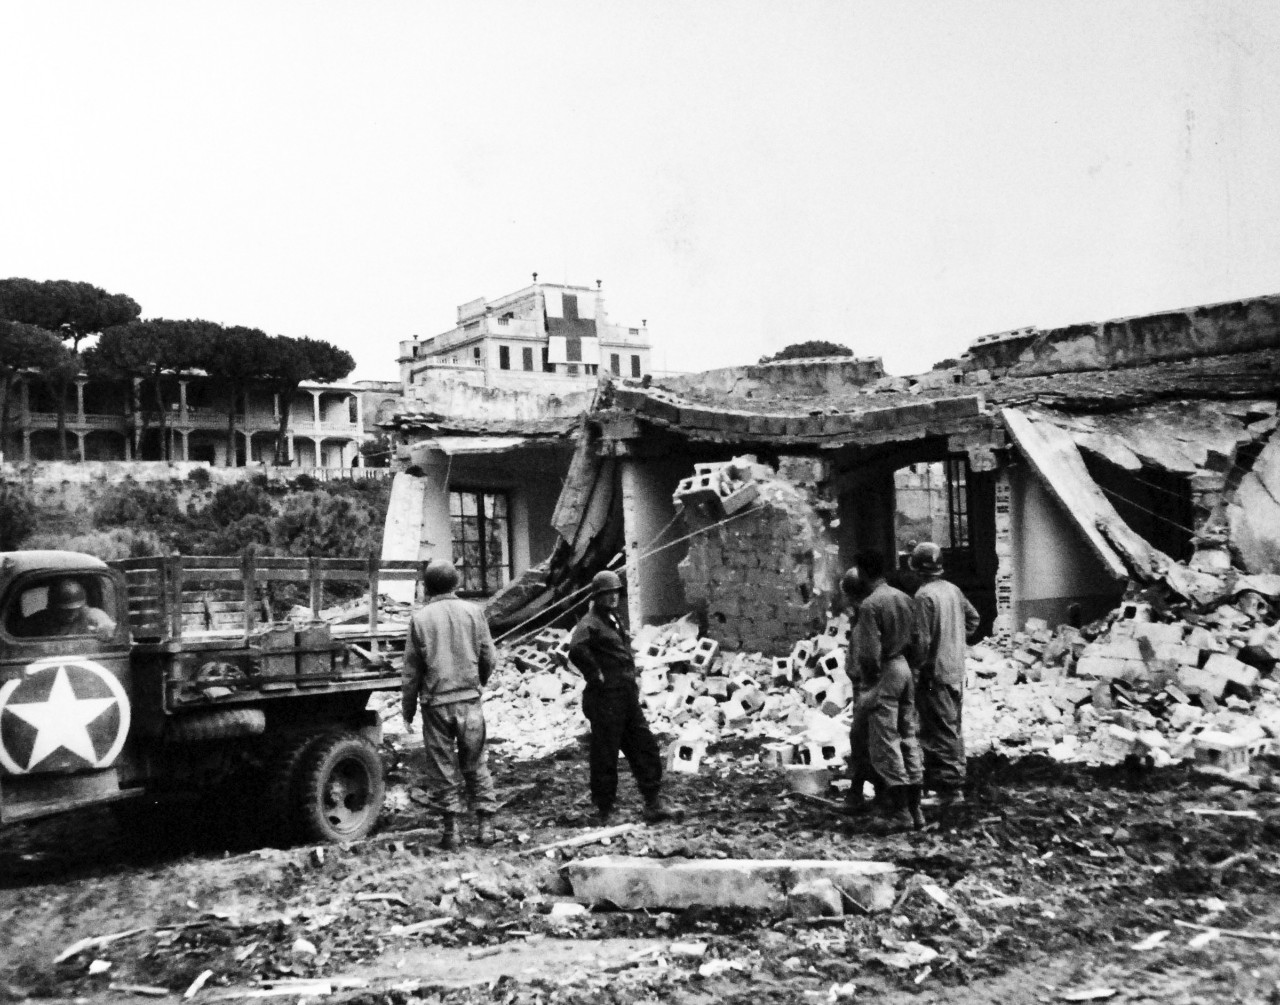 80-G-59383:   Battle of Anzio, January-June 1944 .    A giant Red Cross insignia over a front-line hospital dominates this scene at an Anzio beachhead.  In the foreground, US Army men inspect the ruins of a recently shelled building to look for the injured or dead, February 1944.  Photograph received 25 April 1944.  Official U.S. Navy Photograph, now in he collections of the National Archives.  (2014/03/12).    